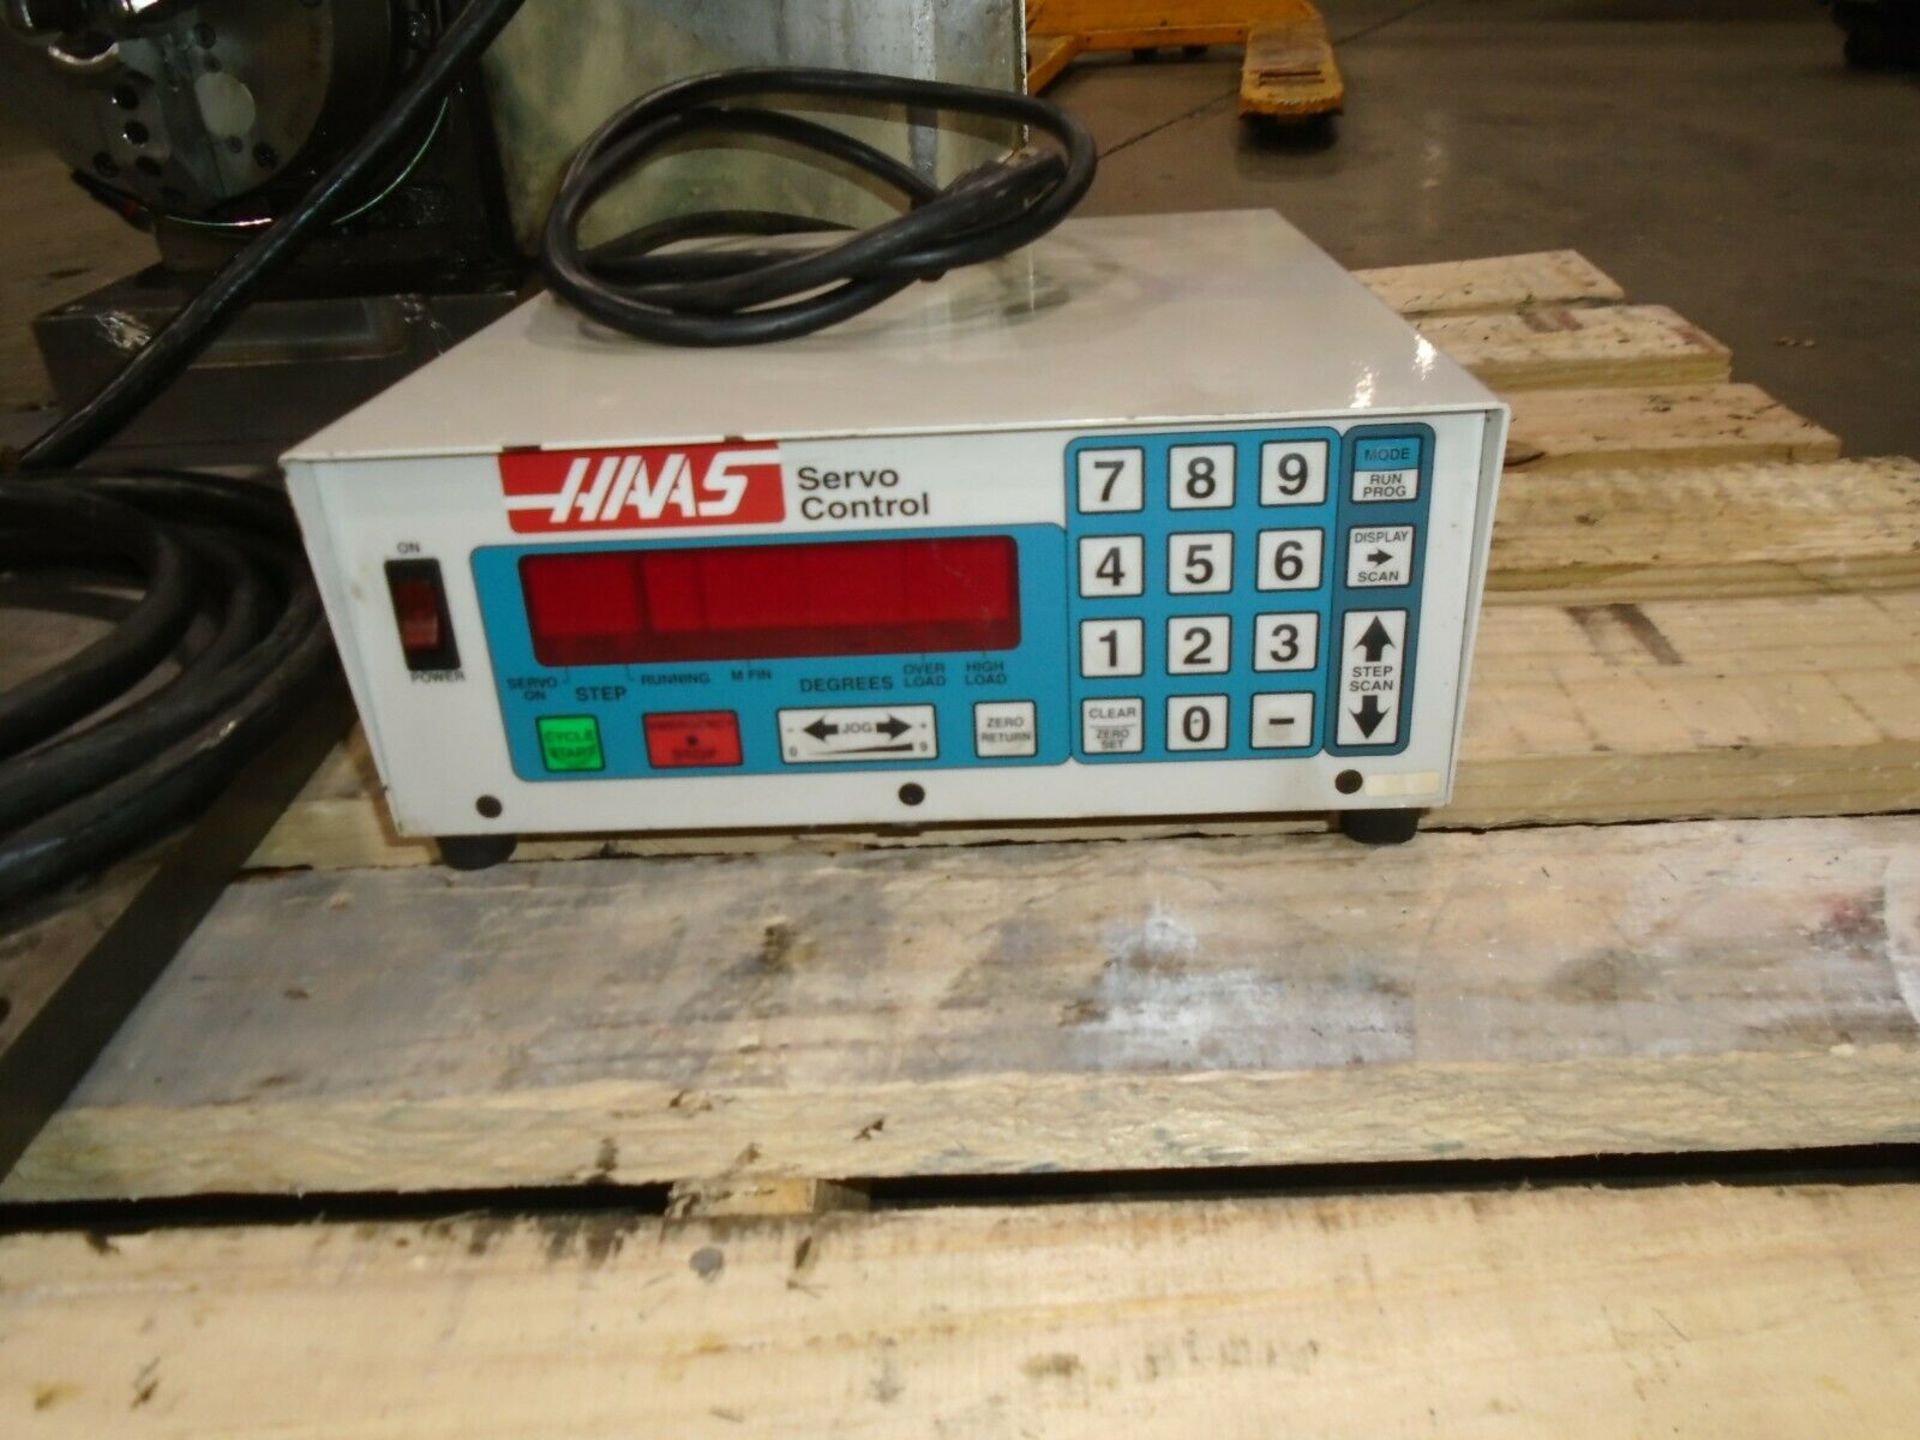 Haas CNC HRT-160 Rotary Table With Haas Servo Control And 6” Air Chuck - Image 6 of 6